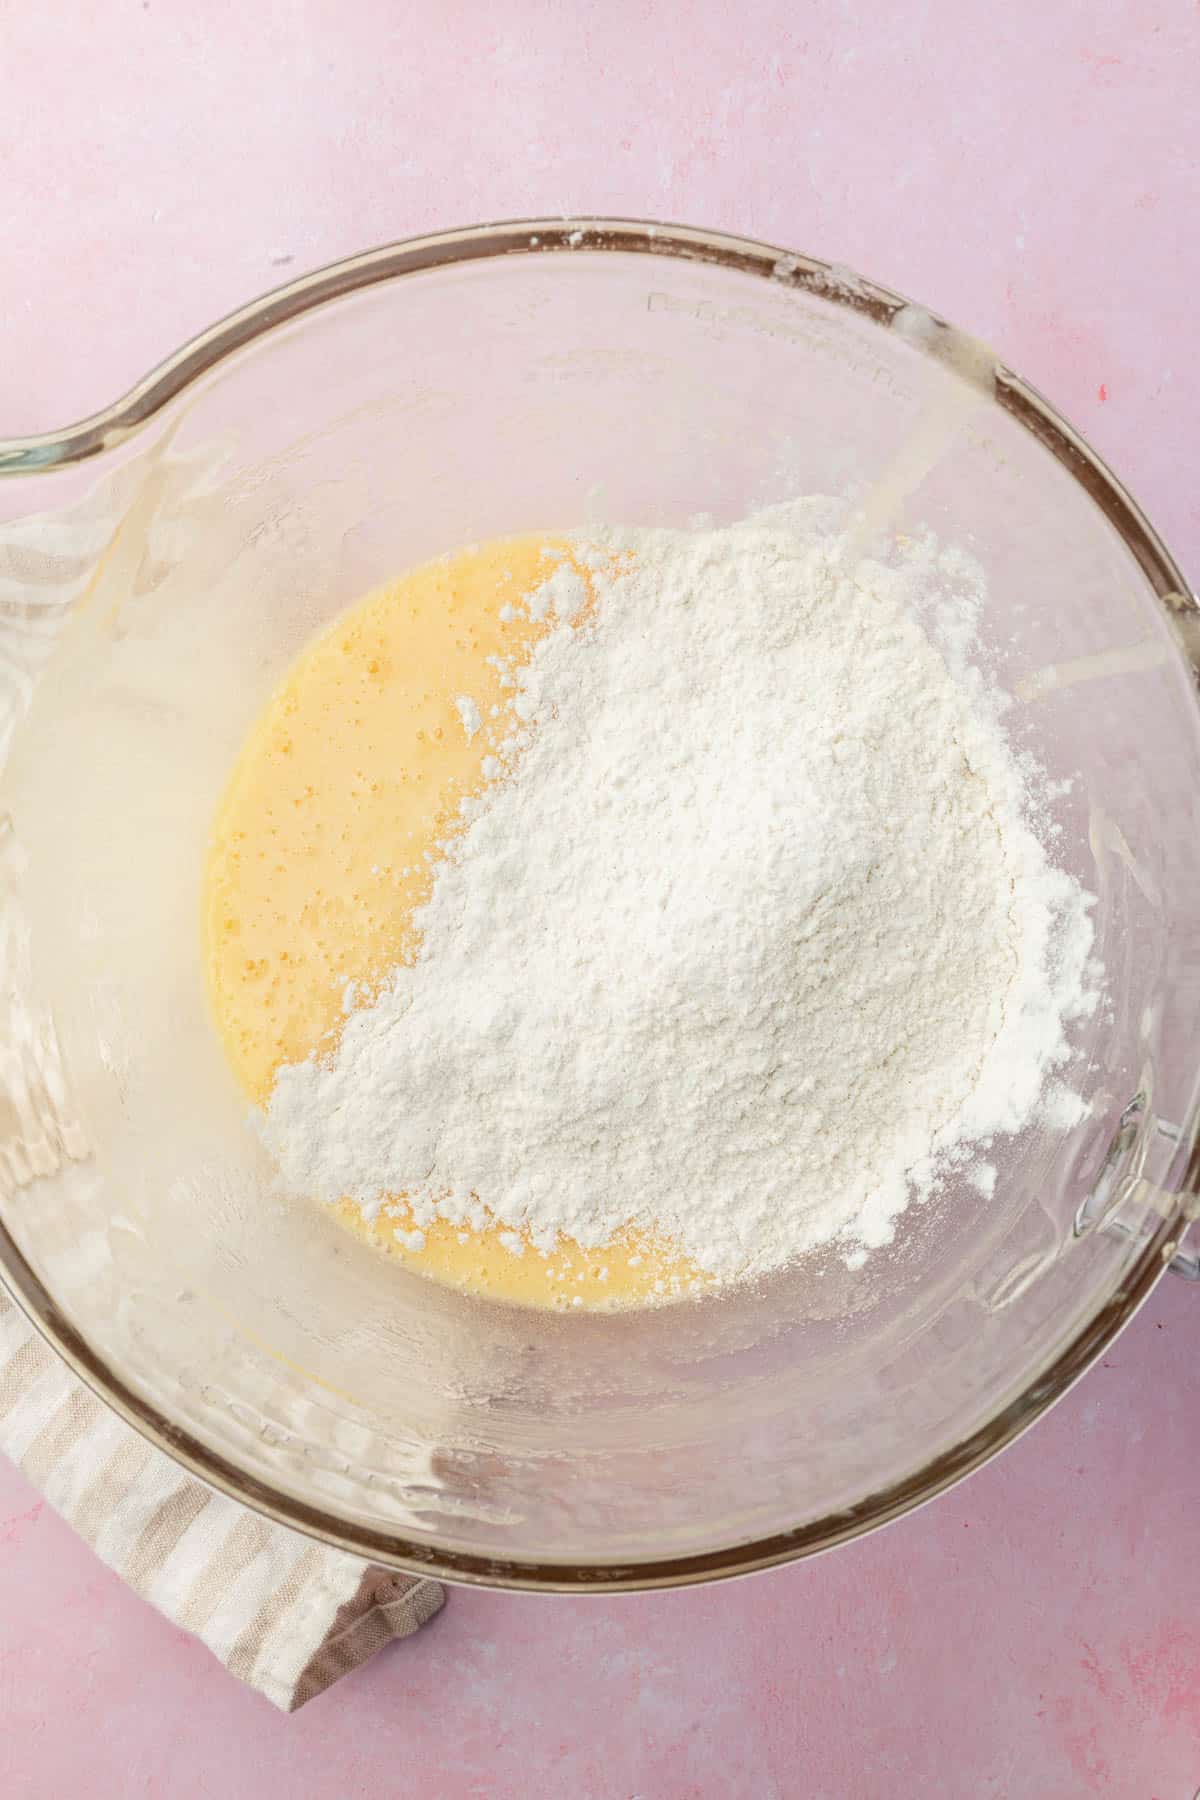 A glass mixing bowl with a cake batter in it topped with a gluten-free flour blend.